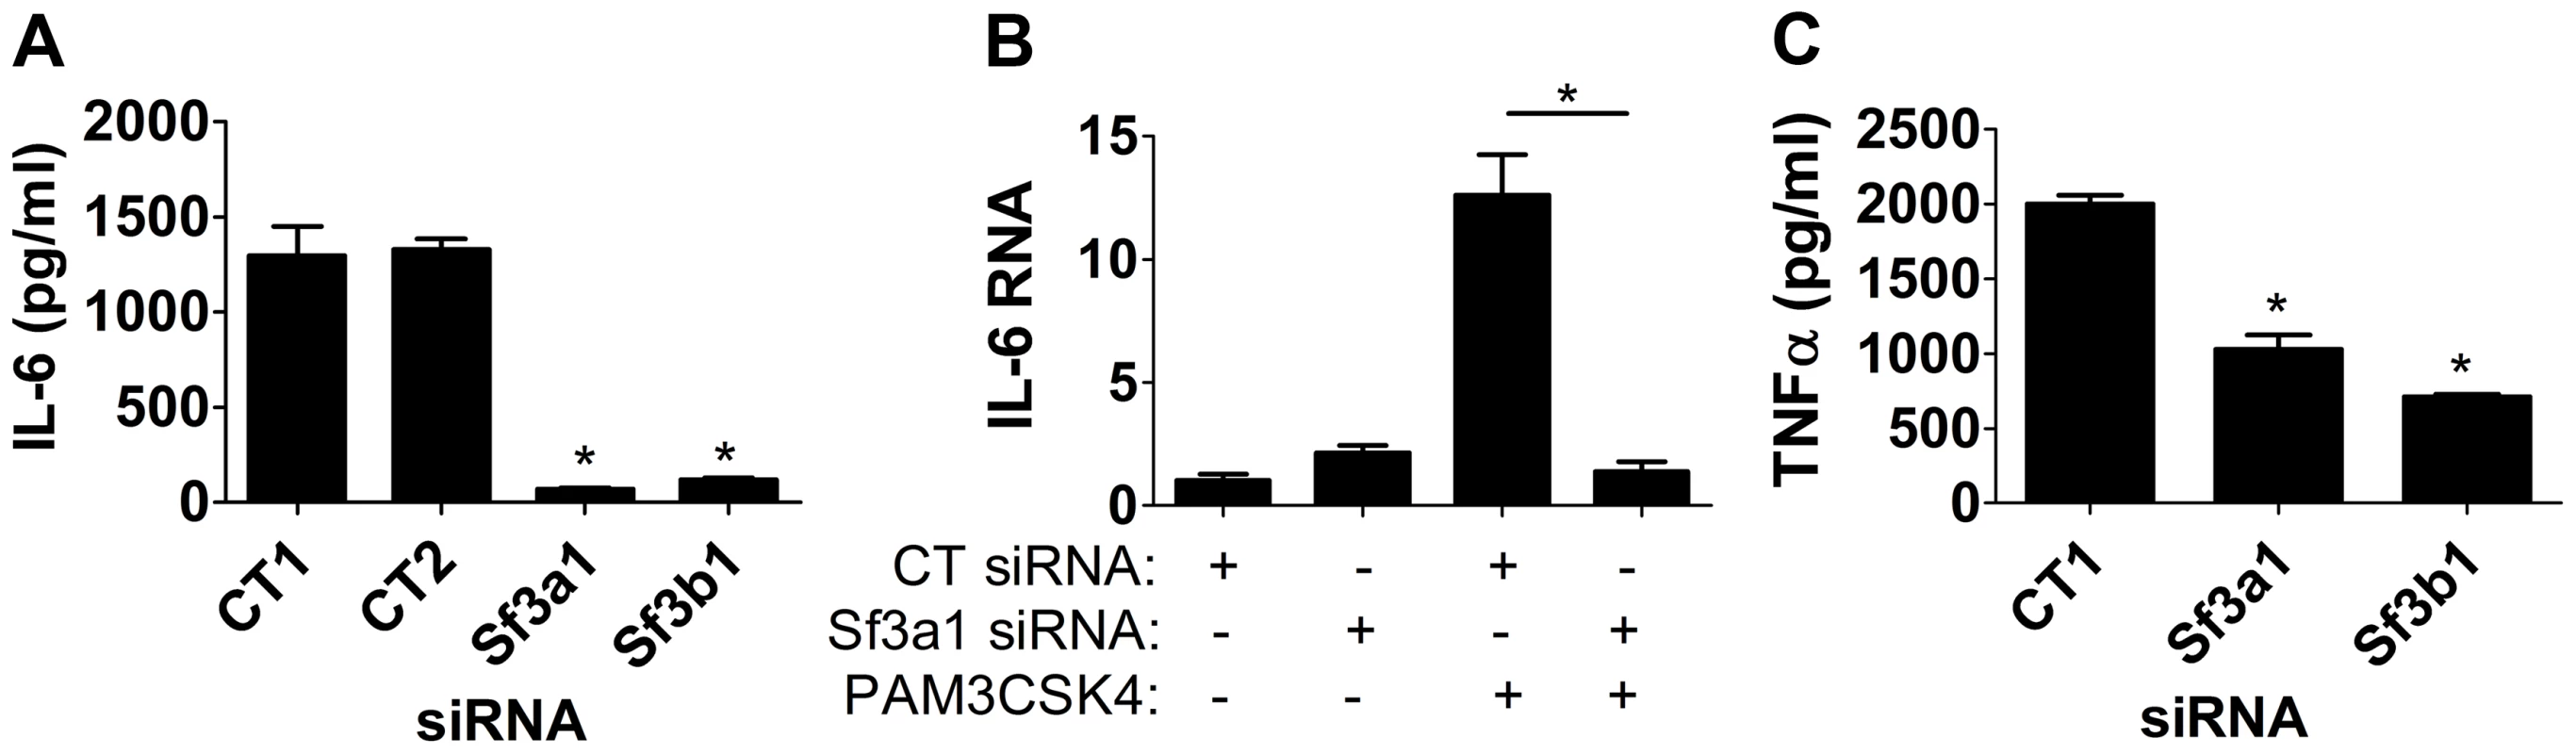 Inhibition of SF3A1 or SF3B1 diminishes PAM3CSK4-induced inflammatory cytokine production.